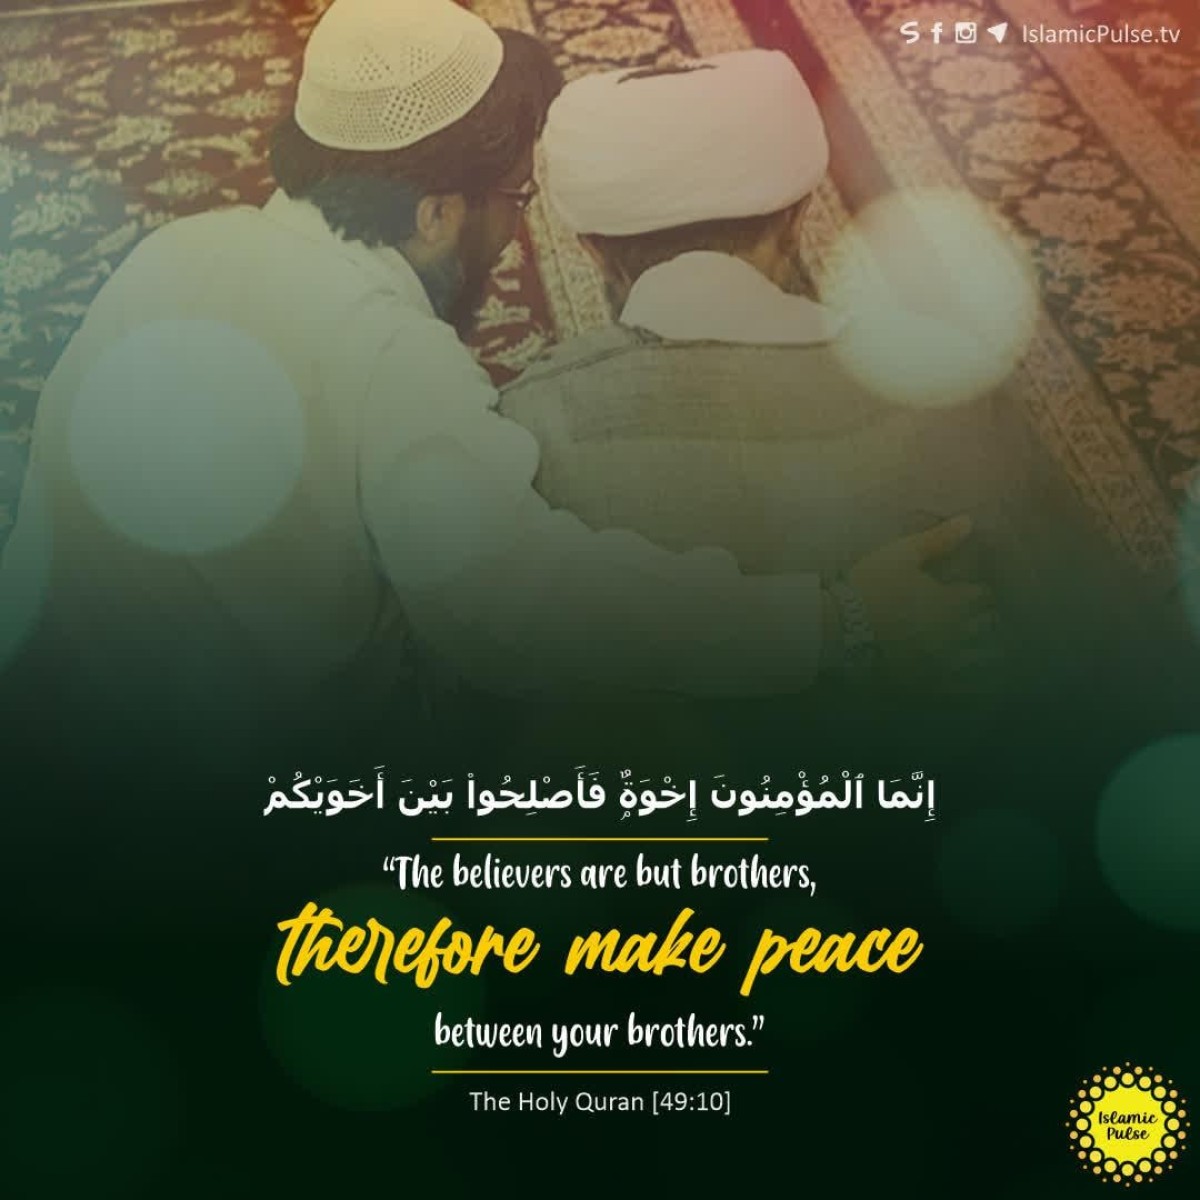 "The believers are but brothers, therefore make peace between your brothers."